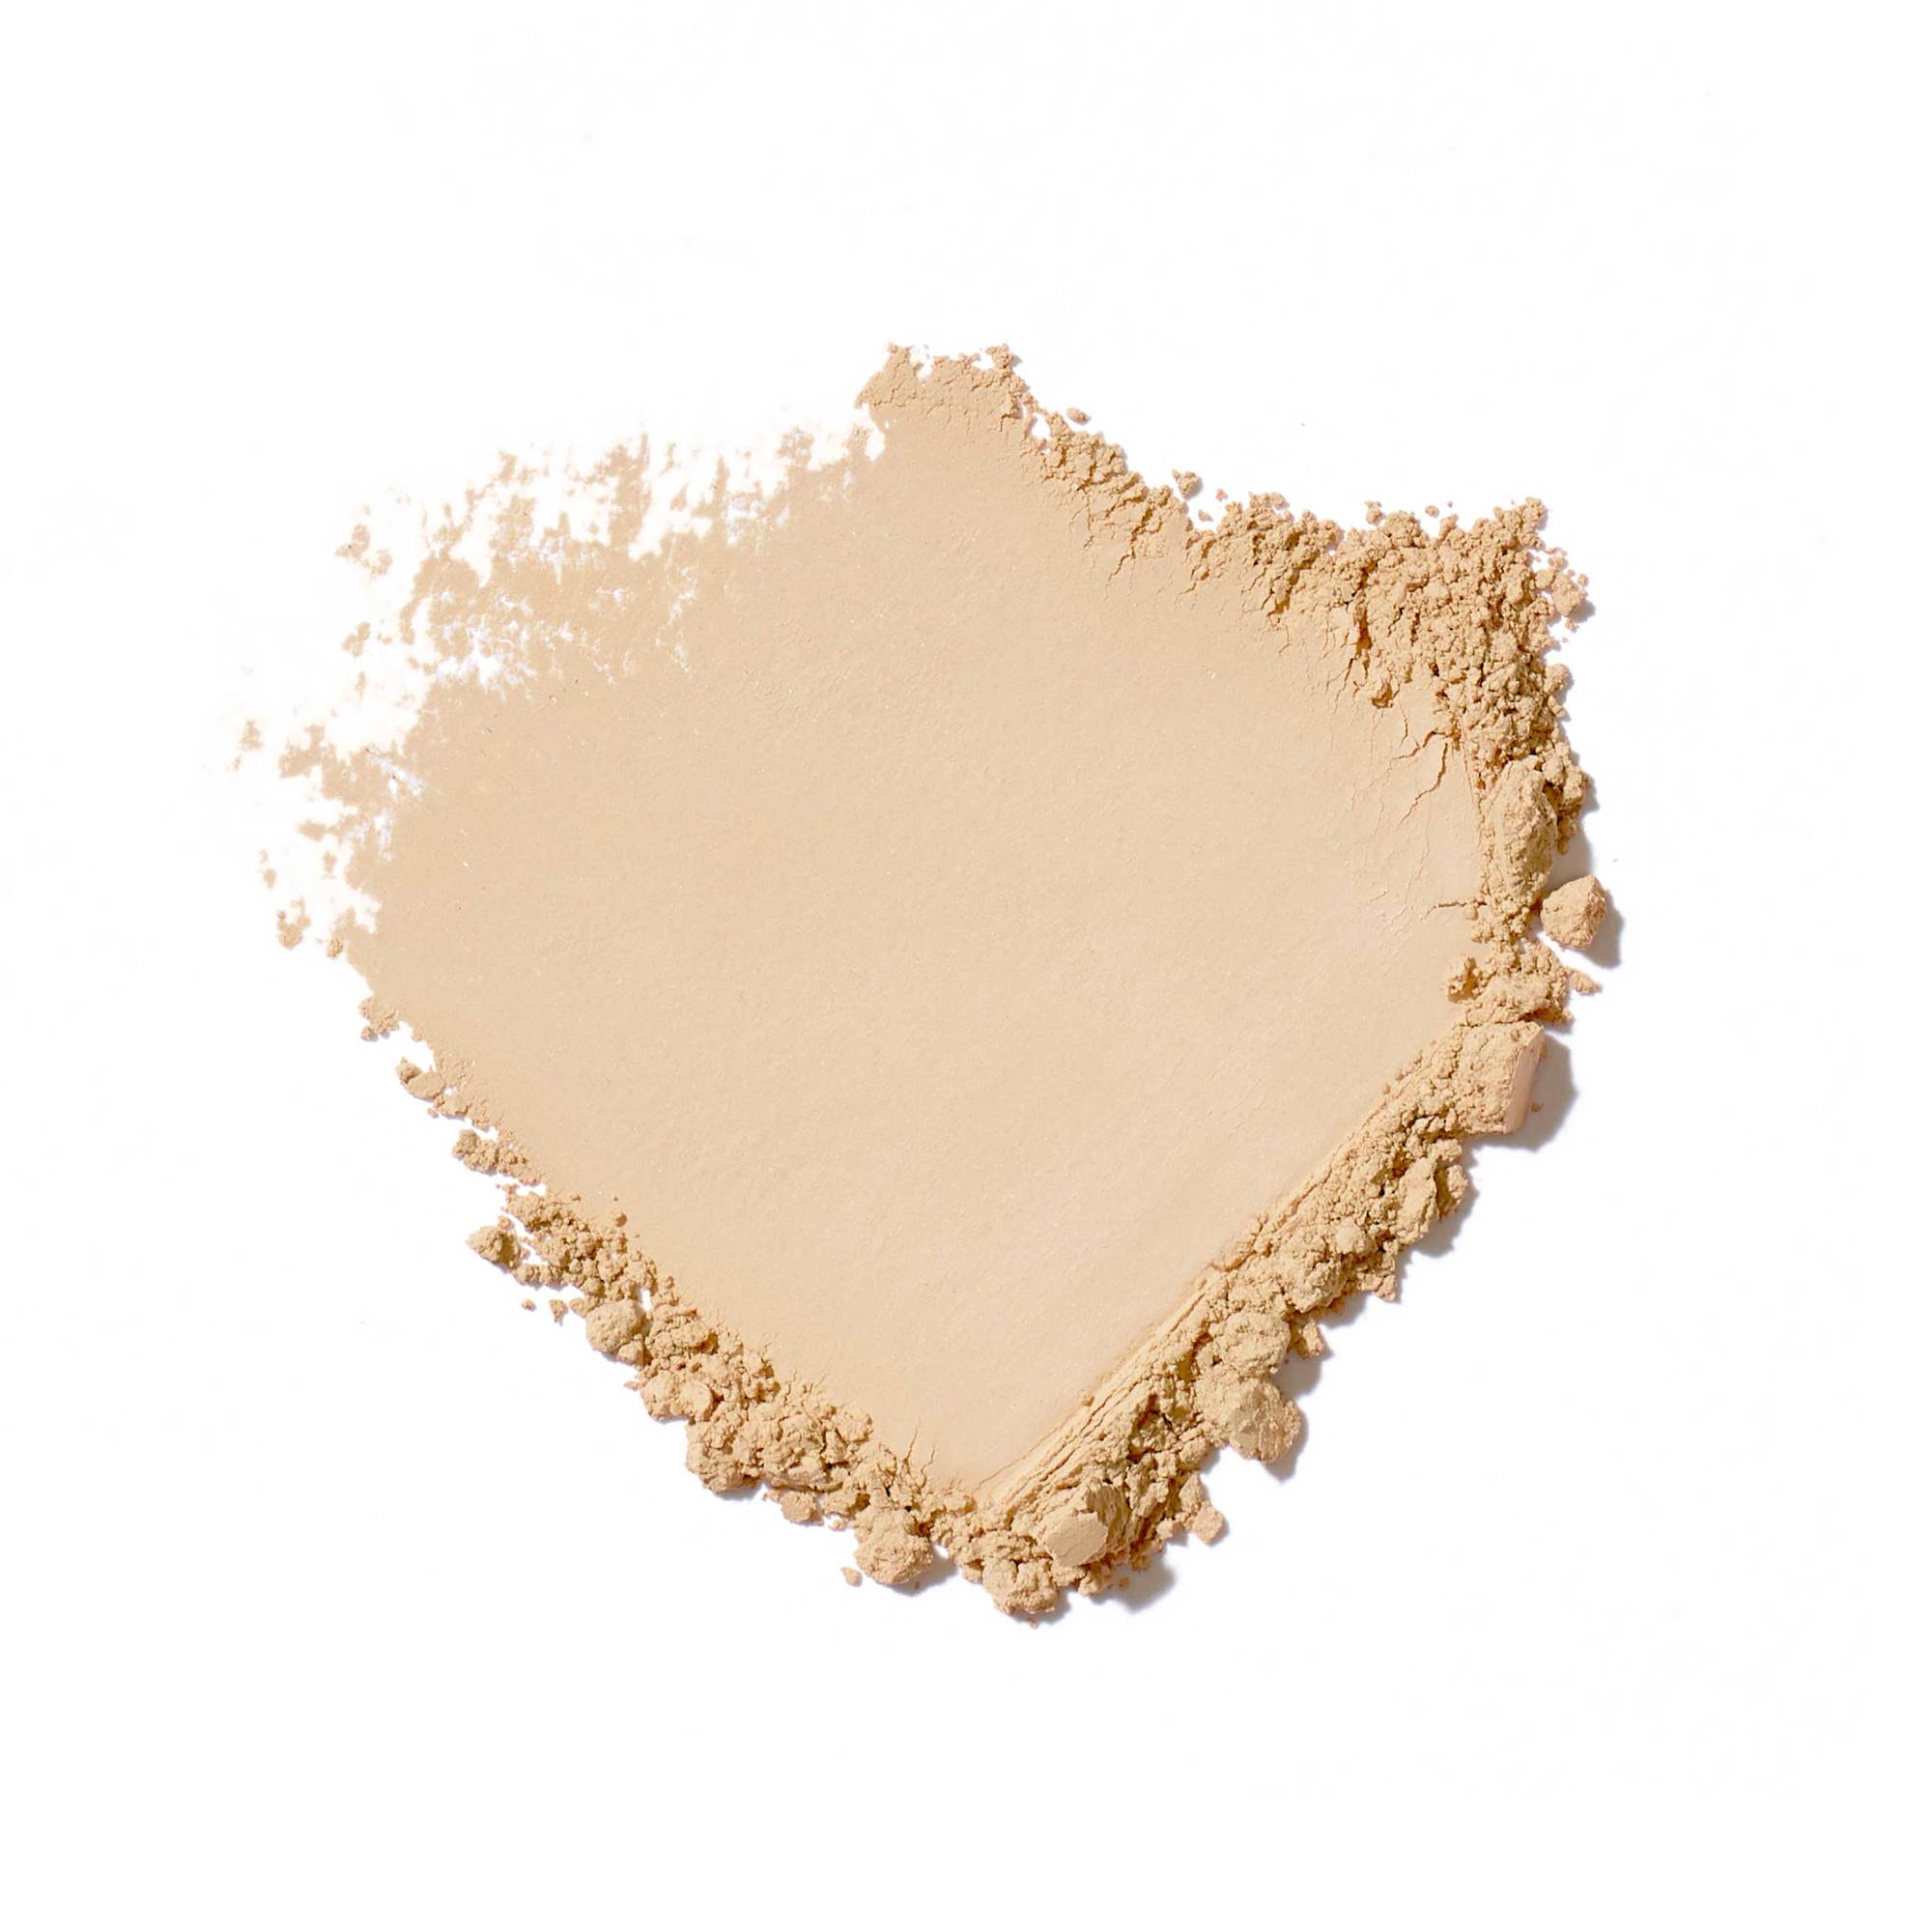 Jane Iredale Amazing Base Loose Mineral Powder Foundation Refillable Brush + 2 Refill Canisters